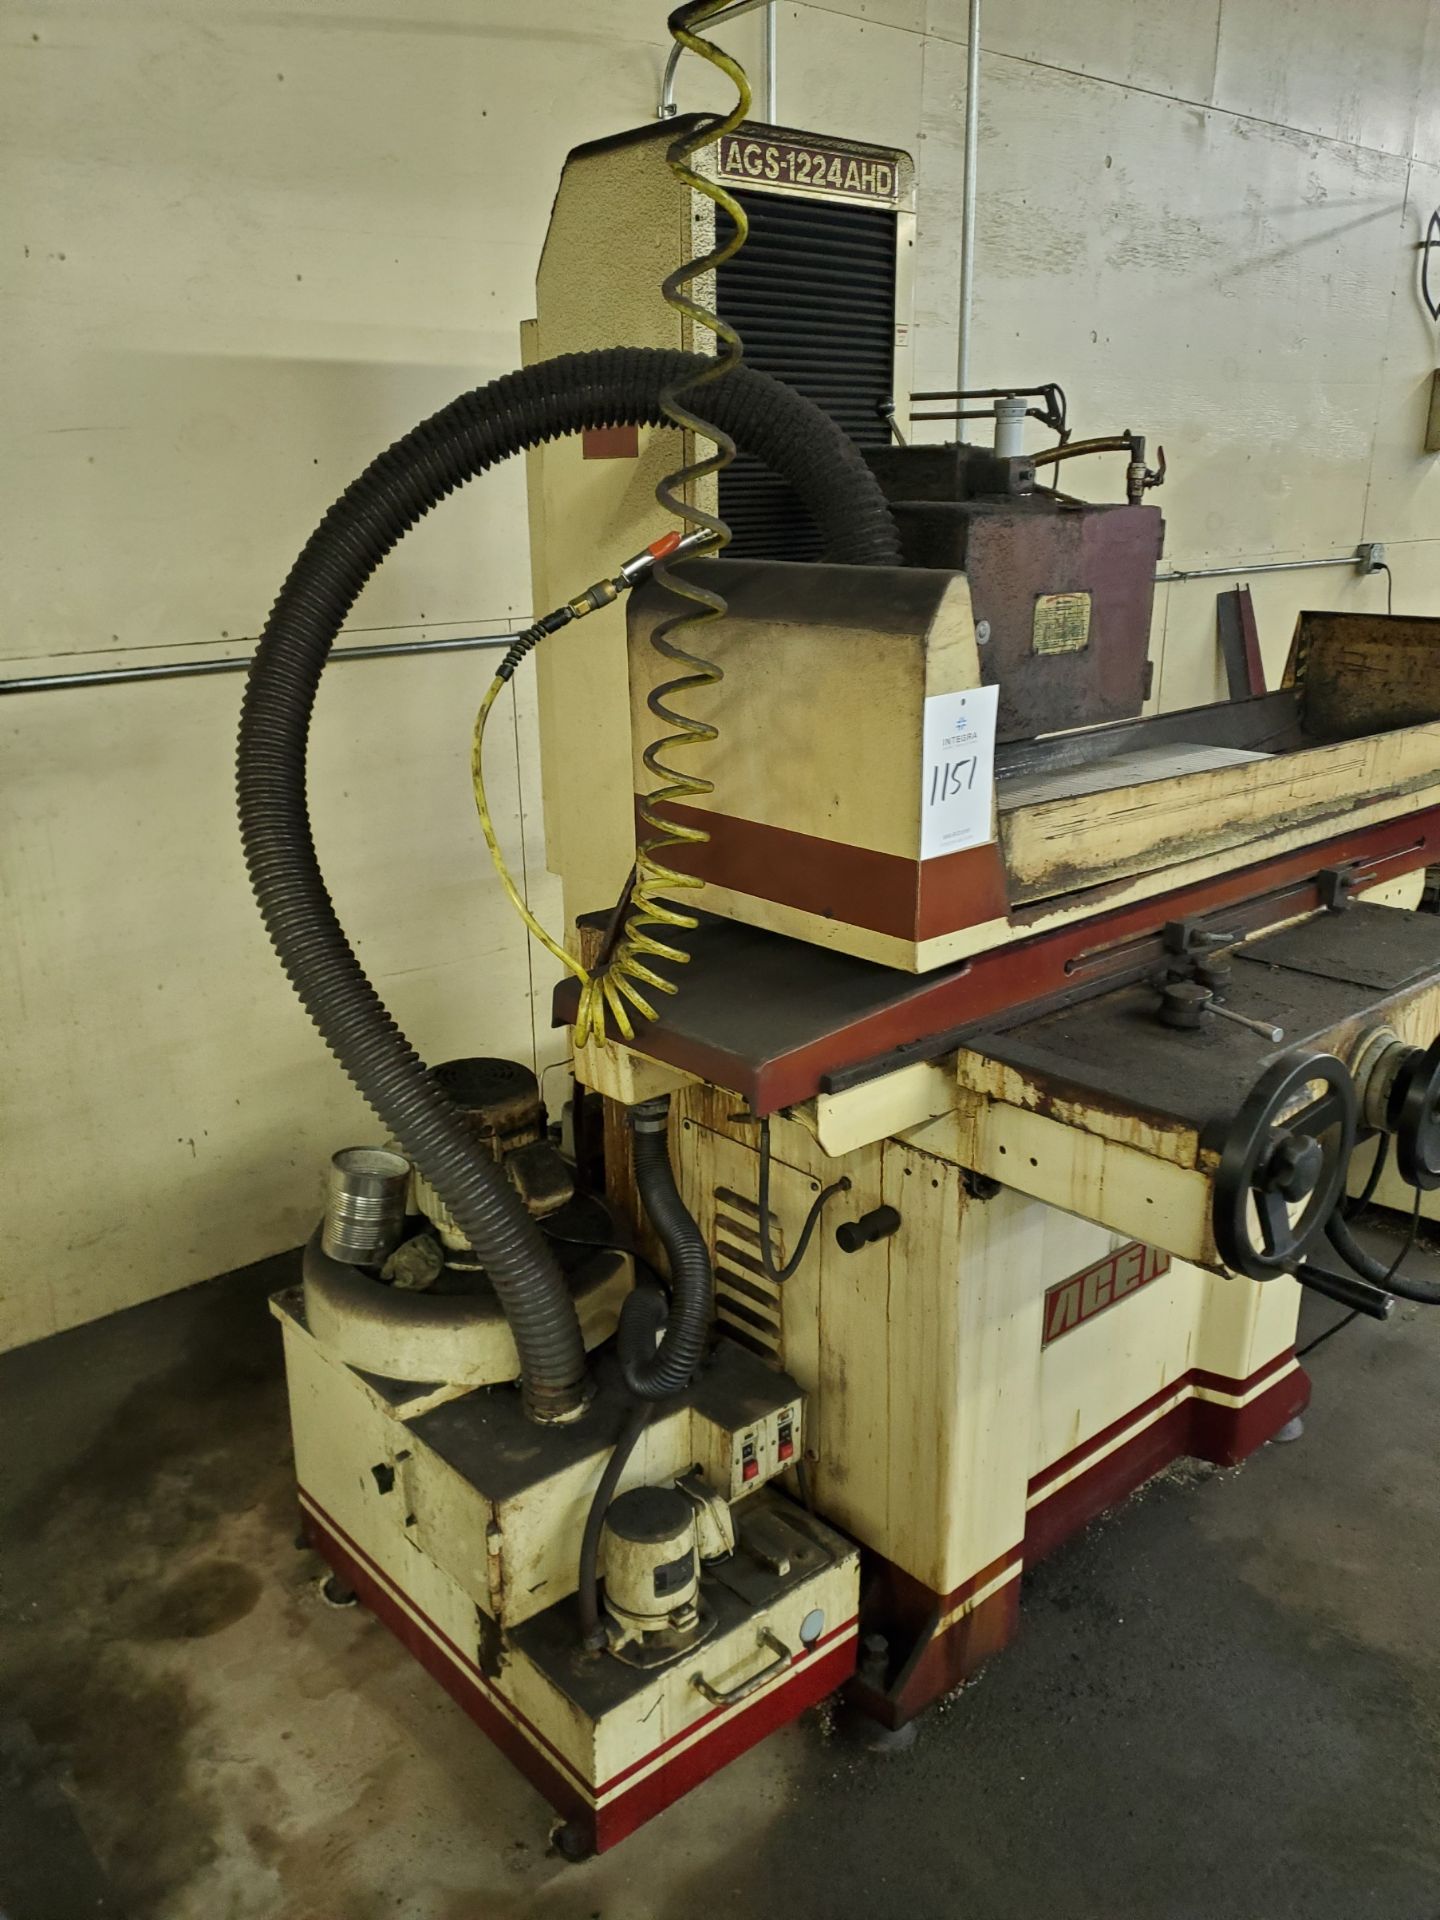 Acer AGS-1224AHD 12" x 24" Automatic Hydraulic Surface Grinder - Image 2 of 5